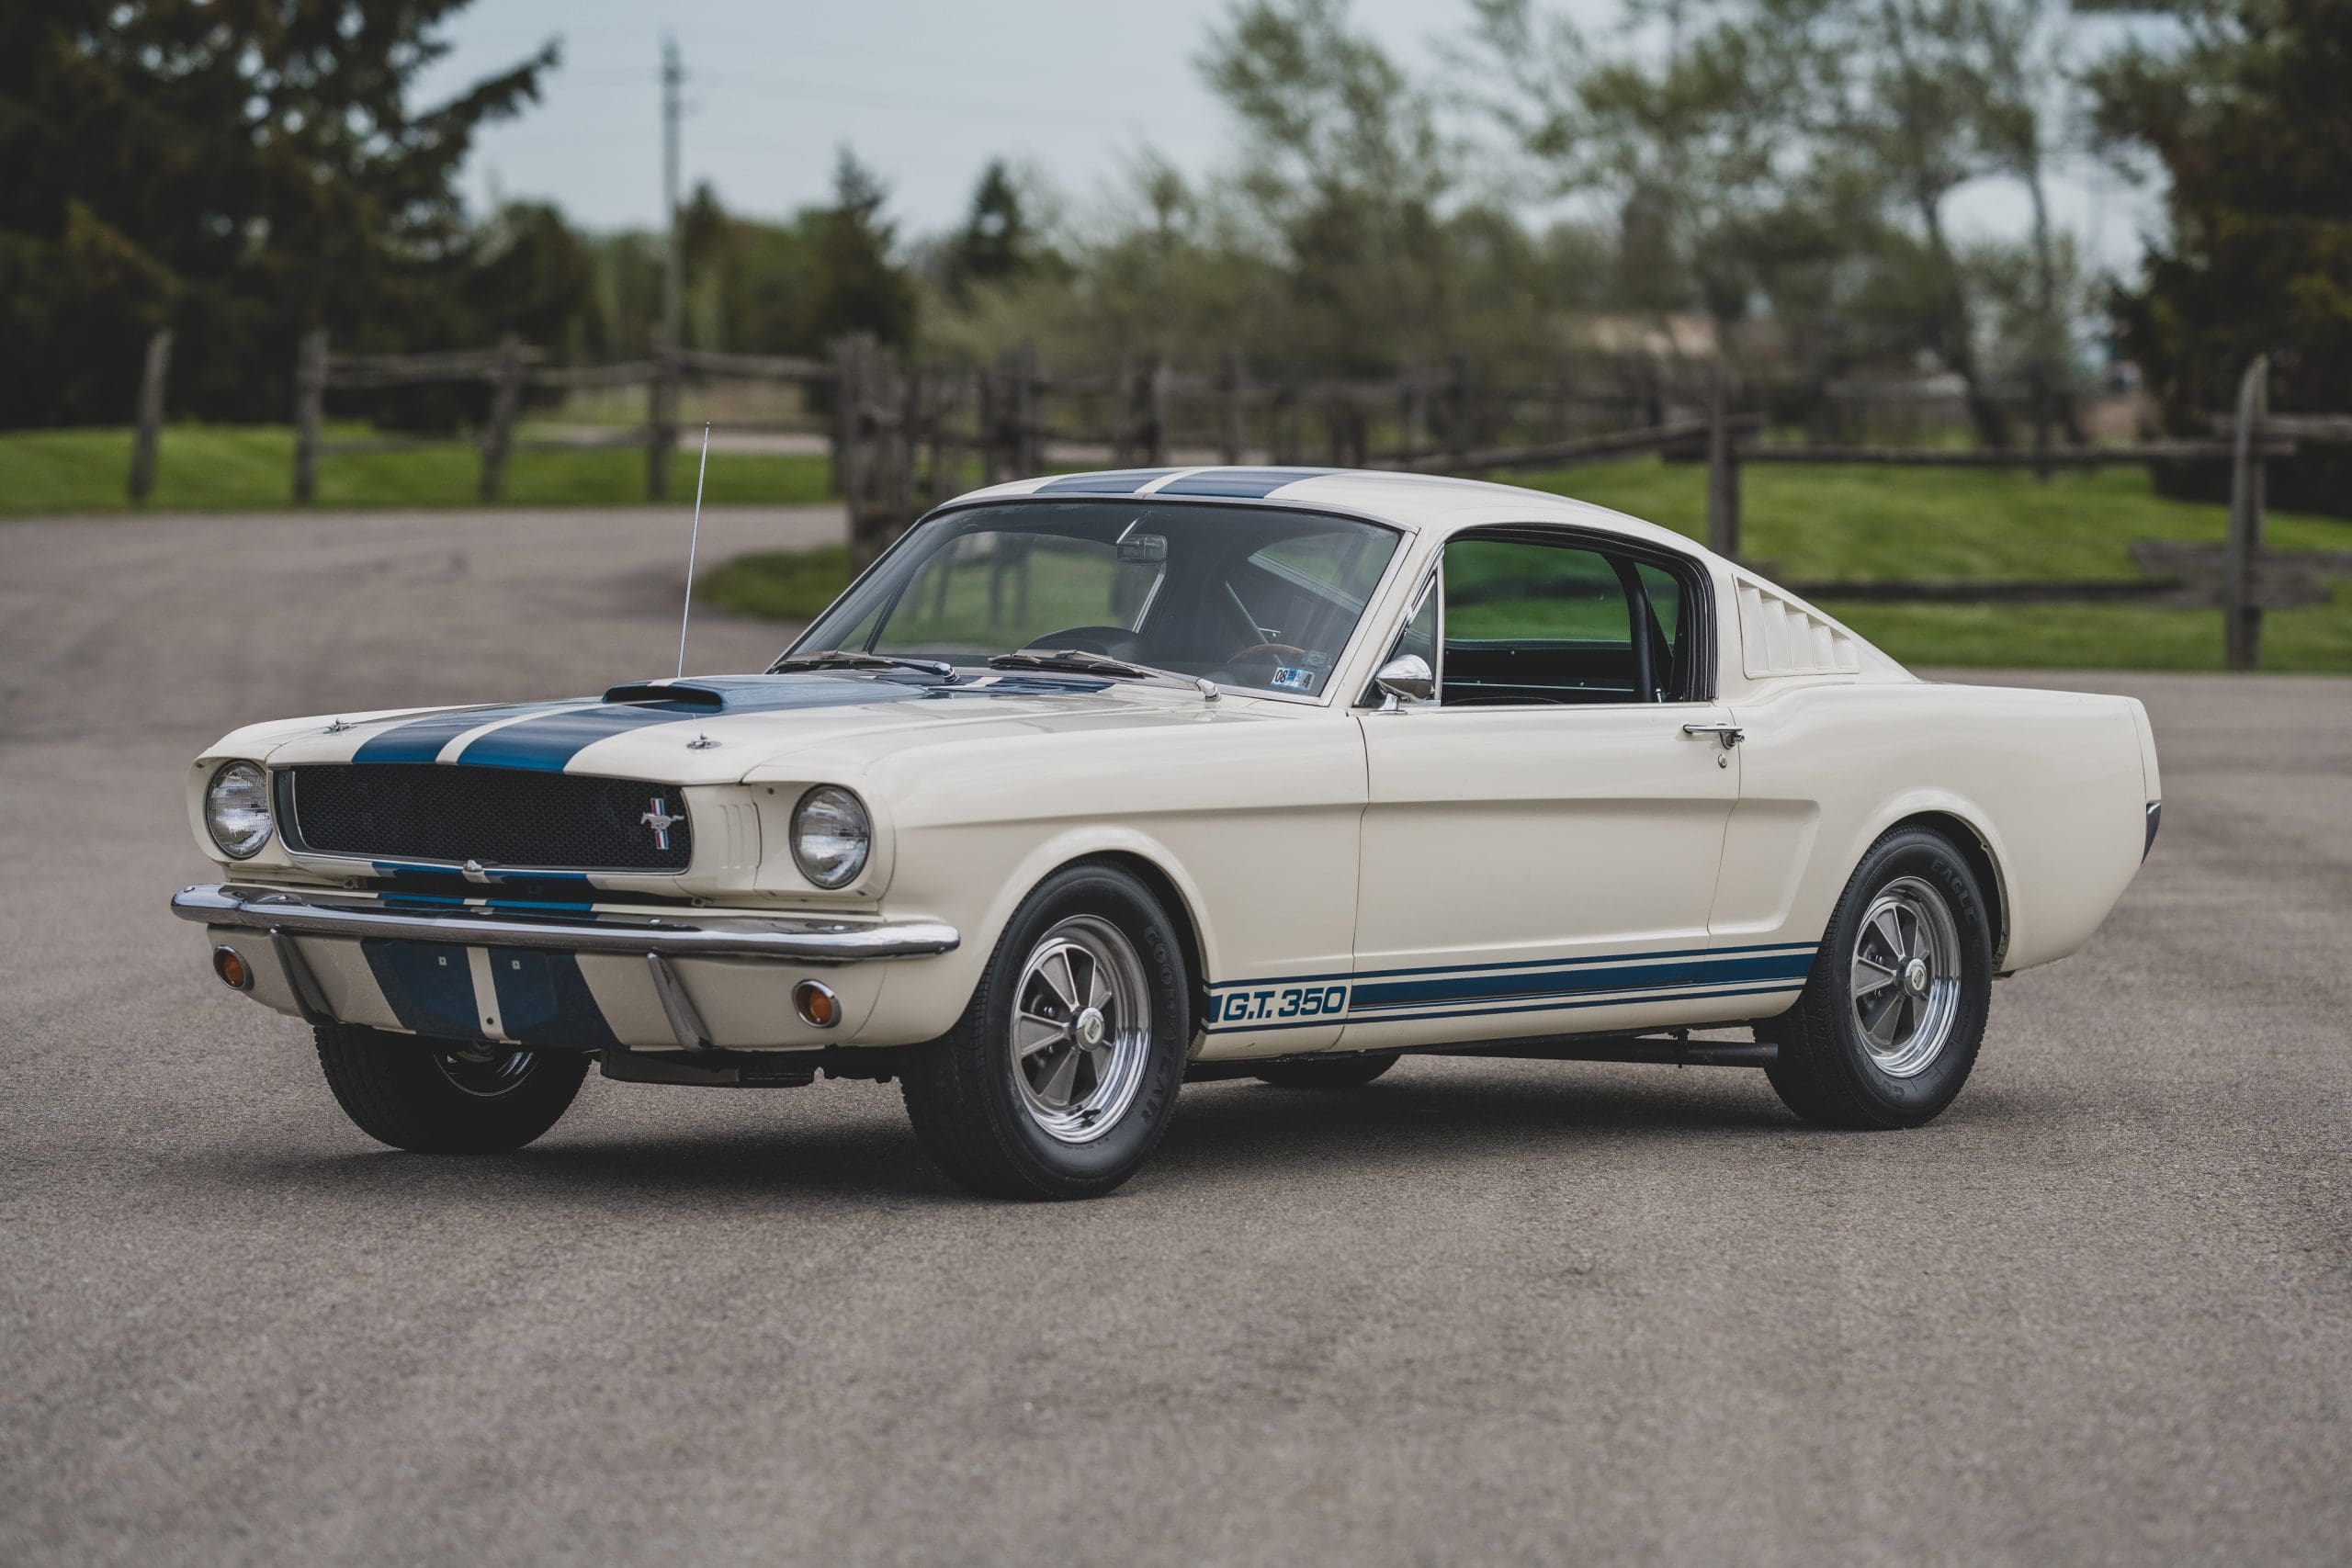 Mustang Of The Day: 1965 Ford Mustang Shelby GT350